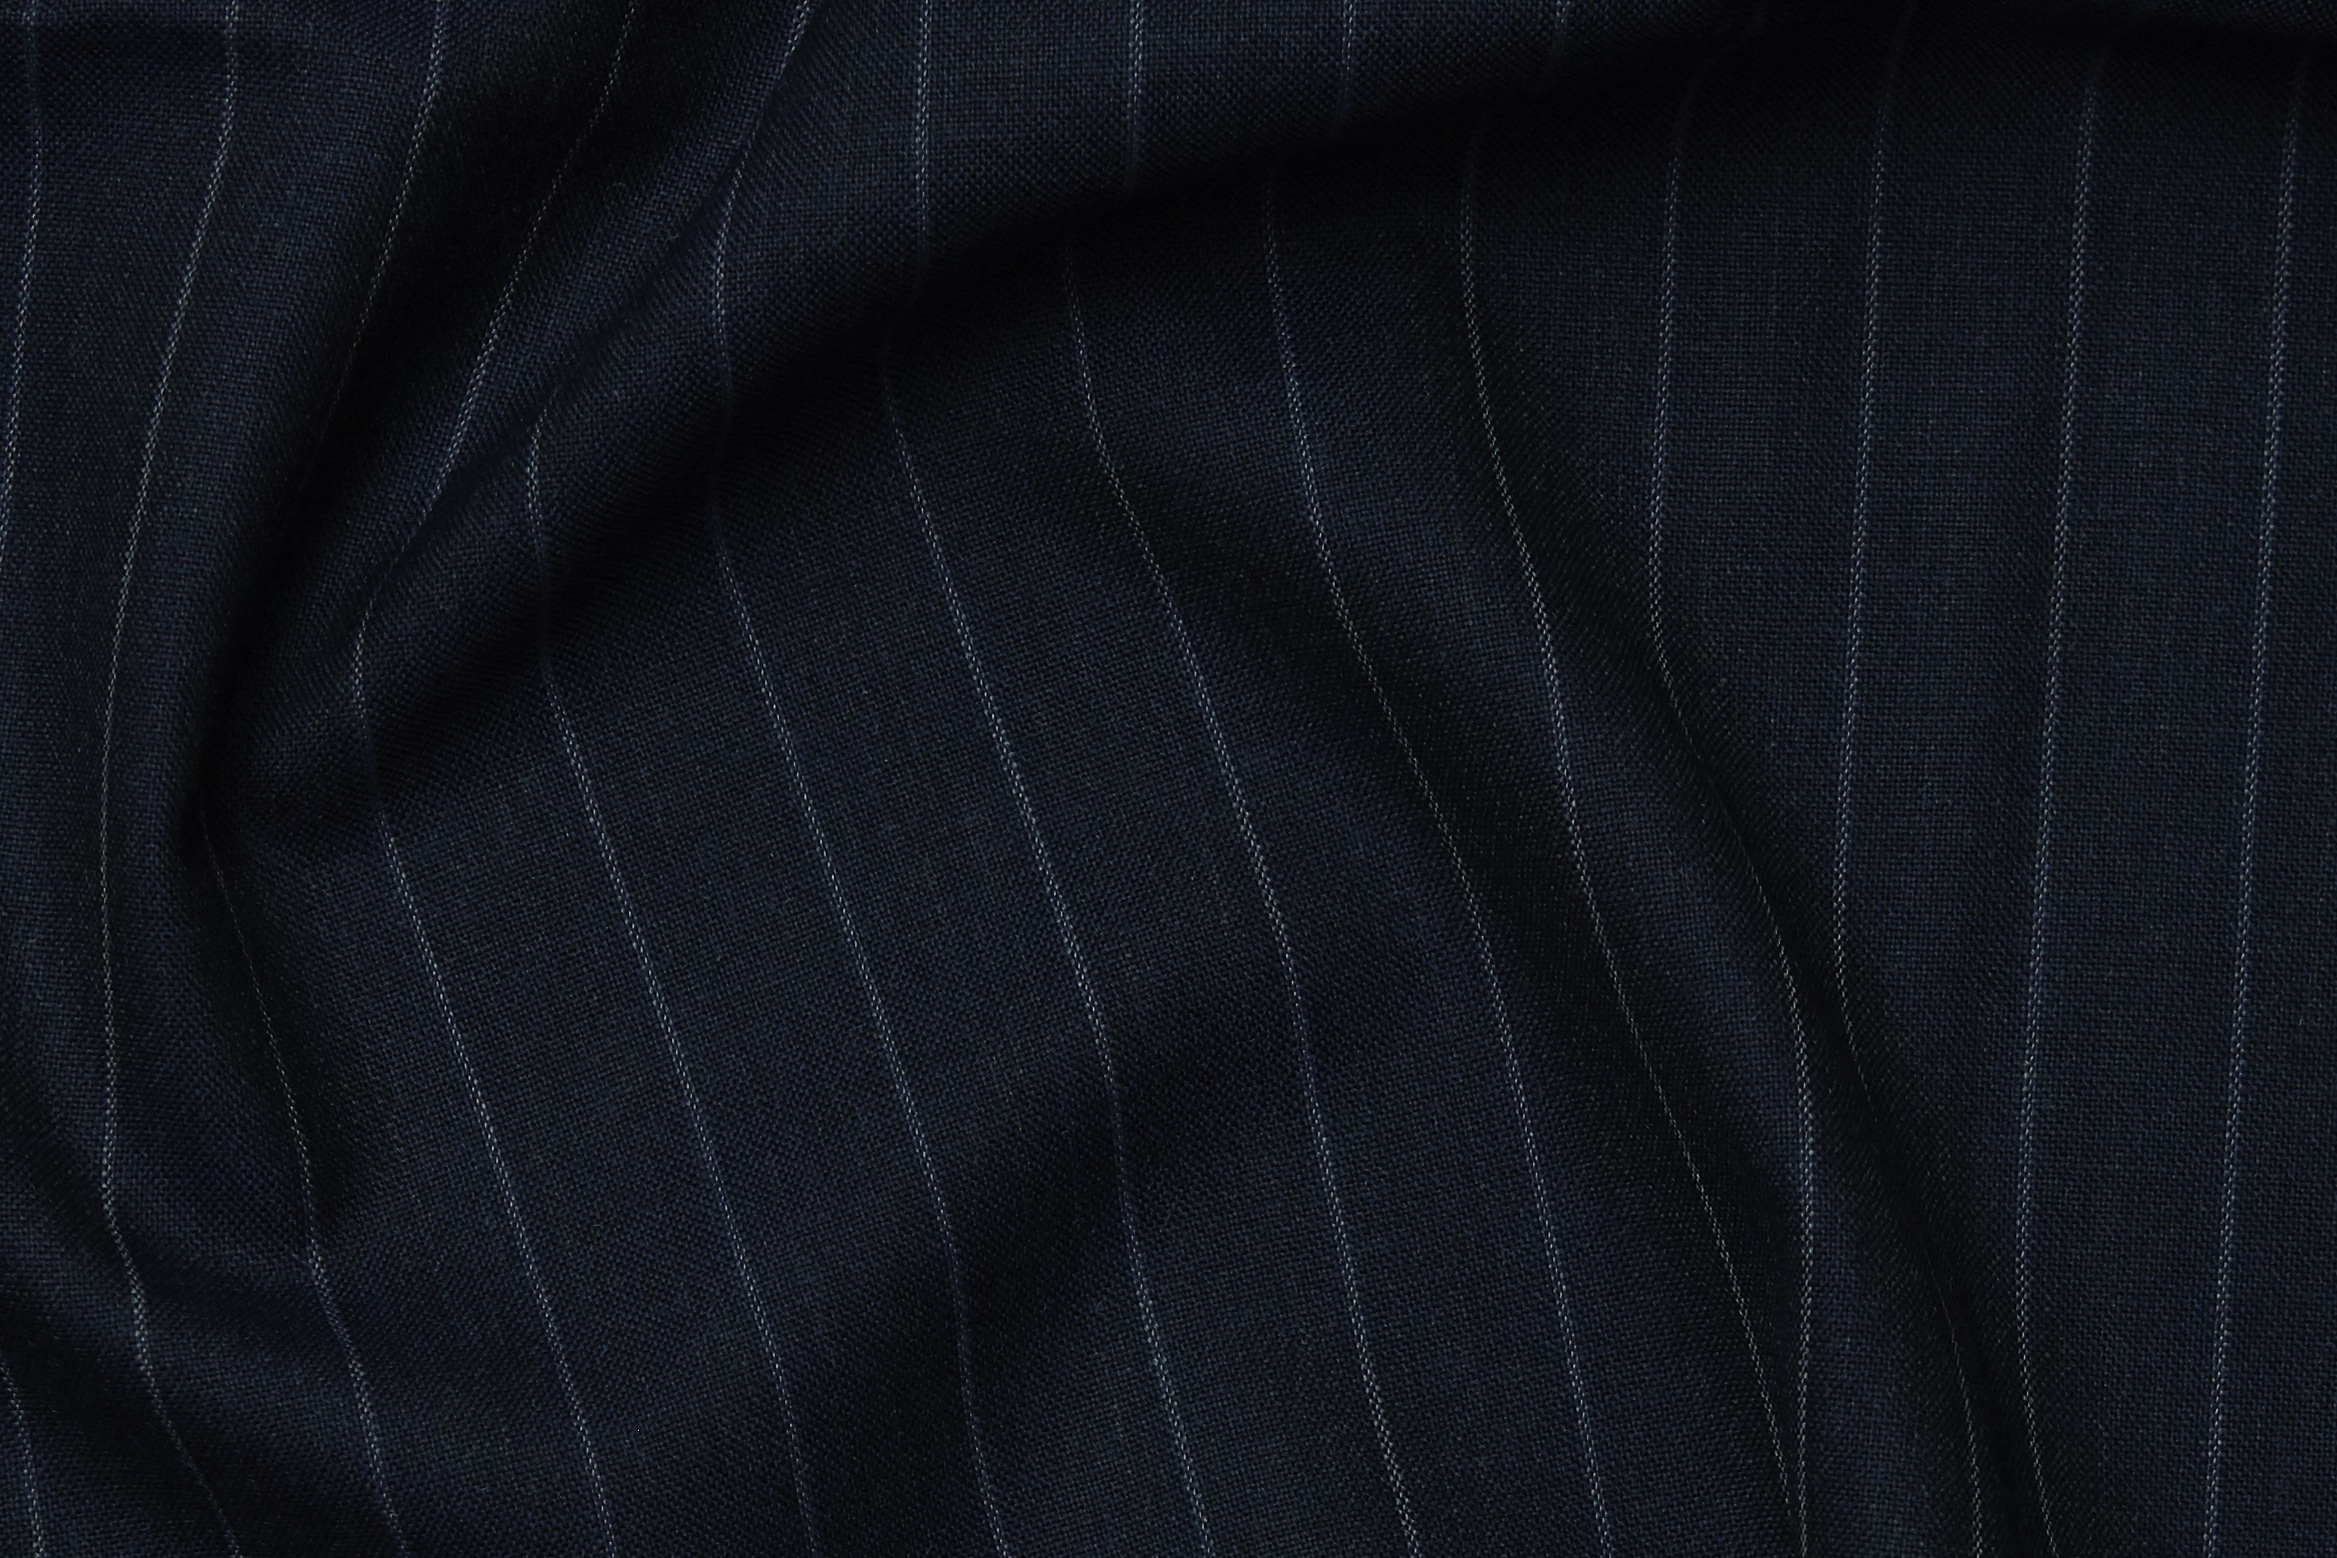 Armoury OP 2186 by Officine Paladino is a plain weave pencil stripe in indigo, made in England.